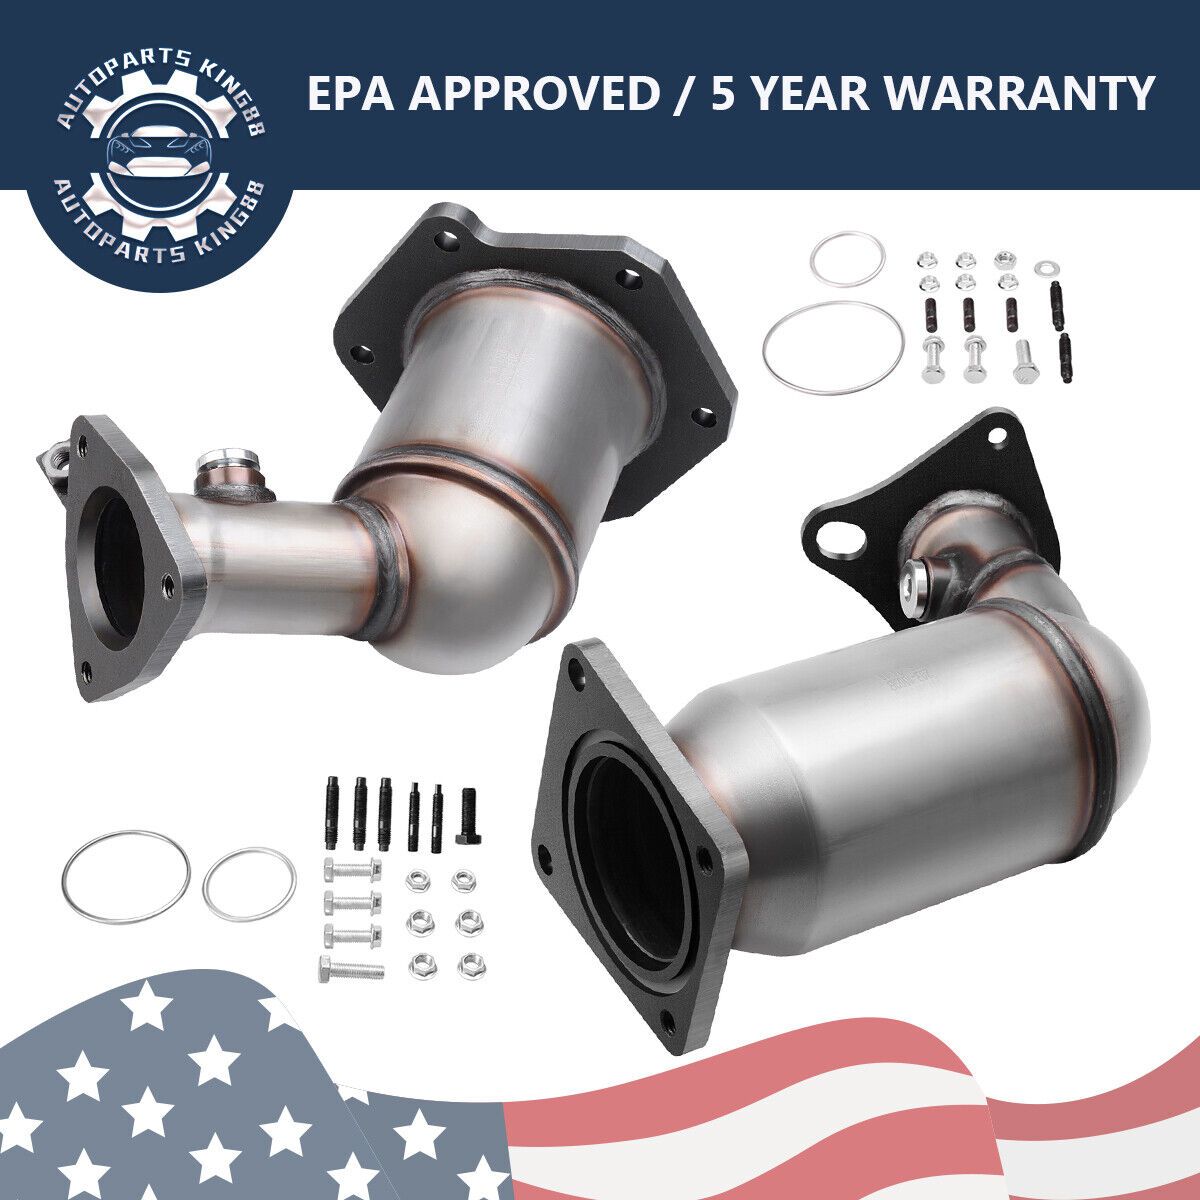 Pair Exhaust Catalytic Converter EPA OBDII fits for 2007-2013 Nissan Altima 3.5L